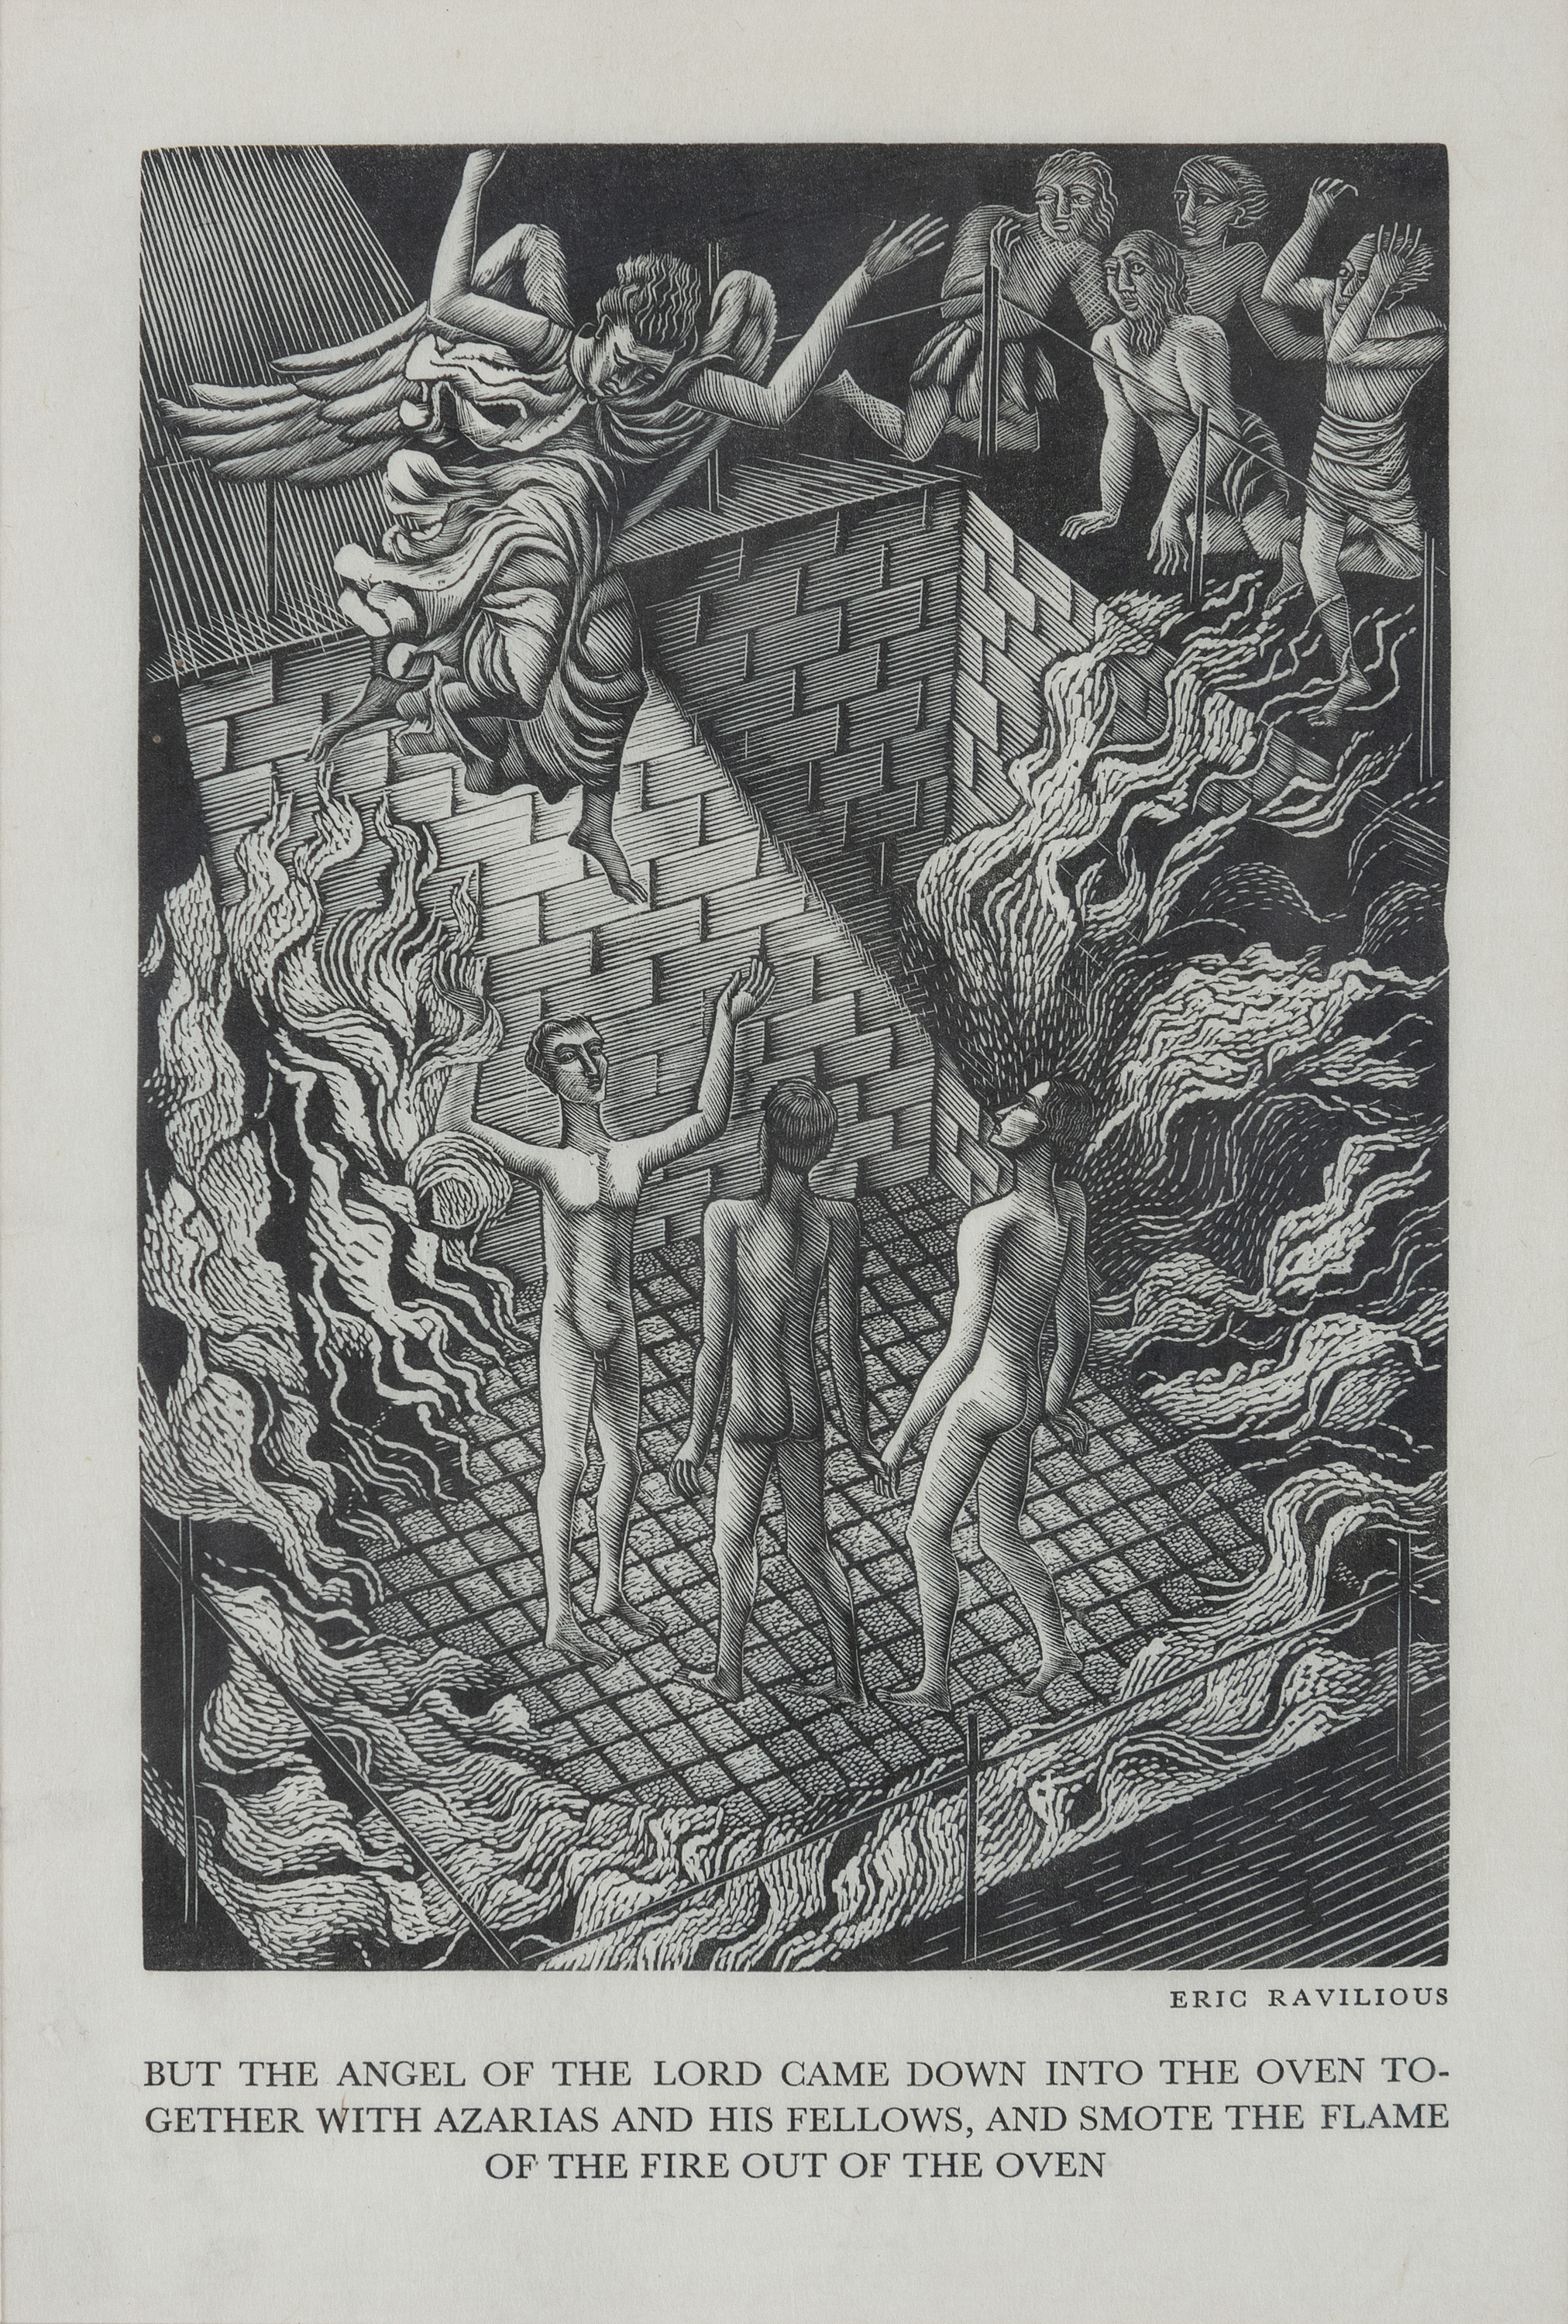 ERIC WILLIAMS RAVILIOUS (1903-1942) From 'The Aopcrypha' - But the Angel of the Lord Came Down